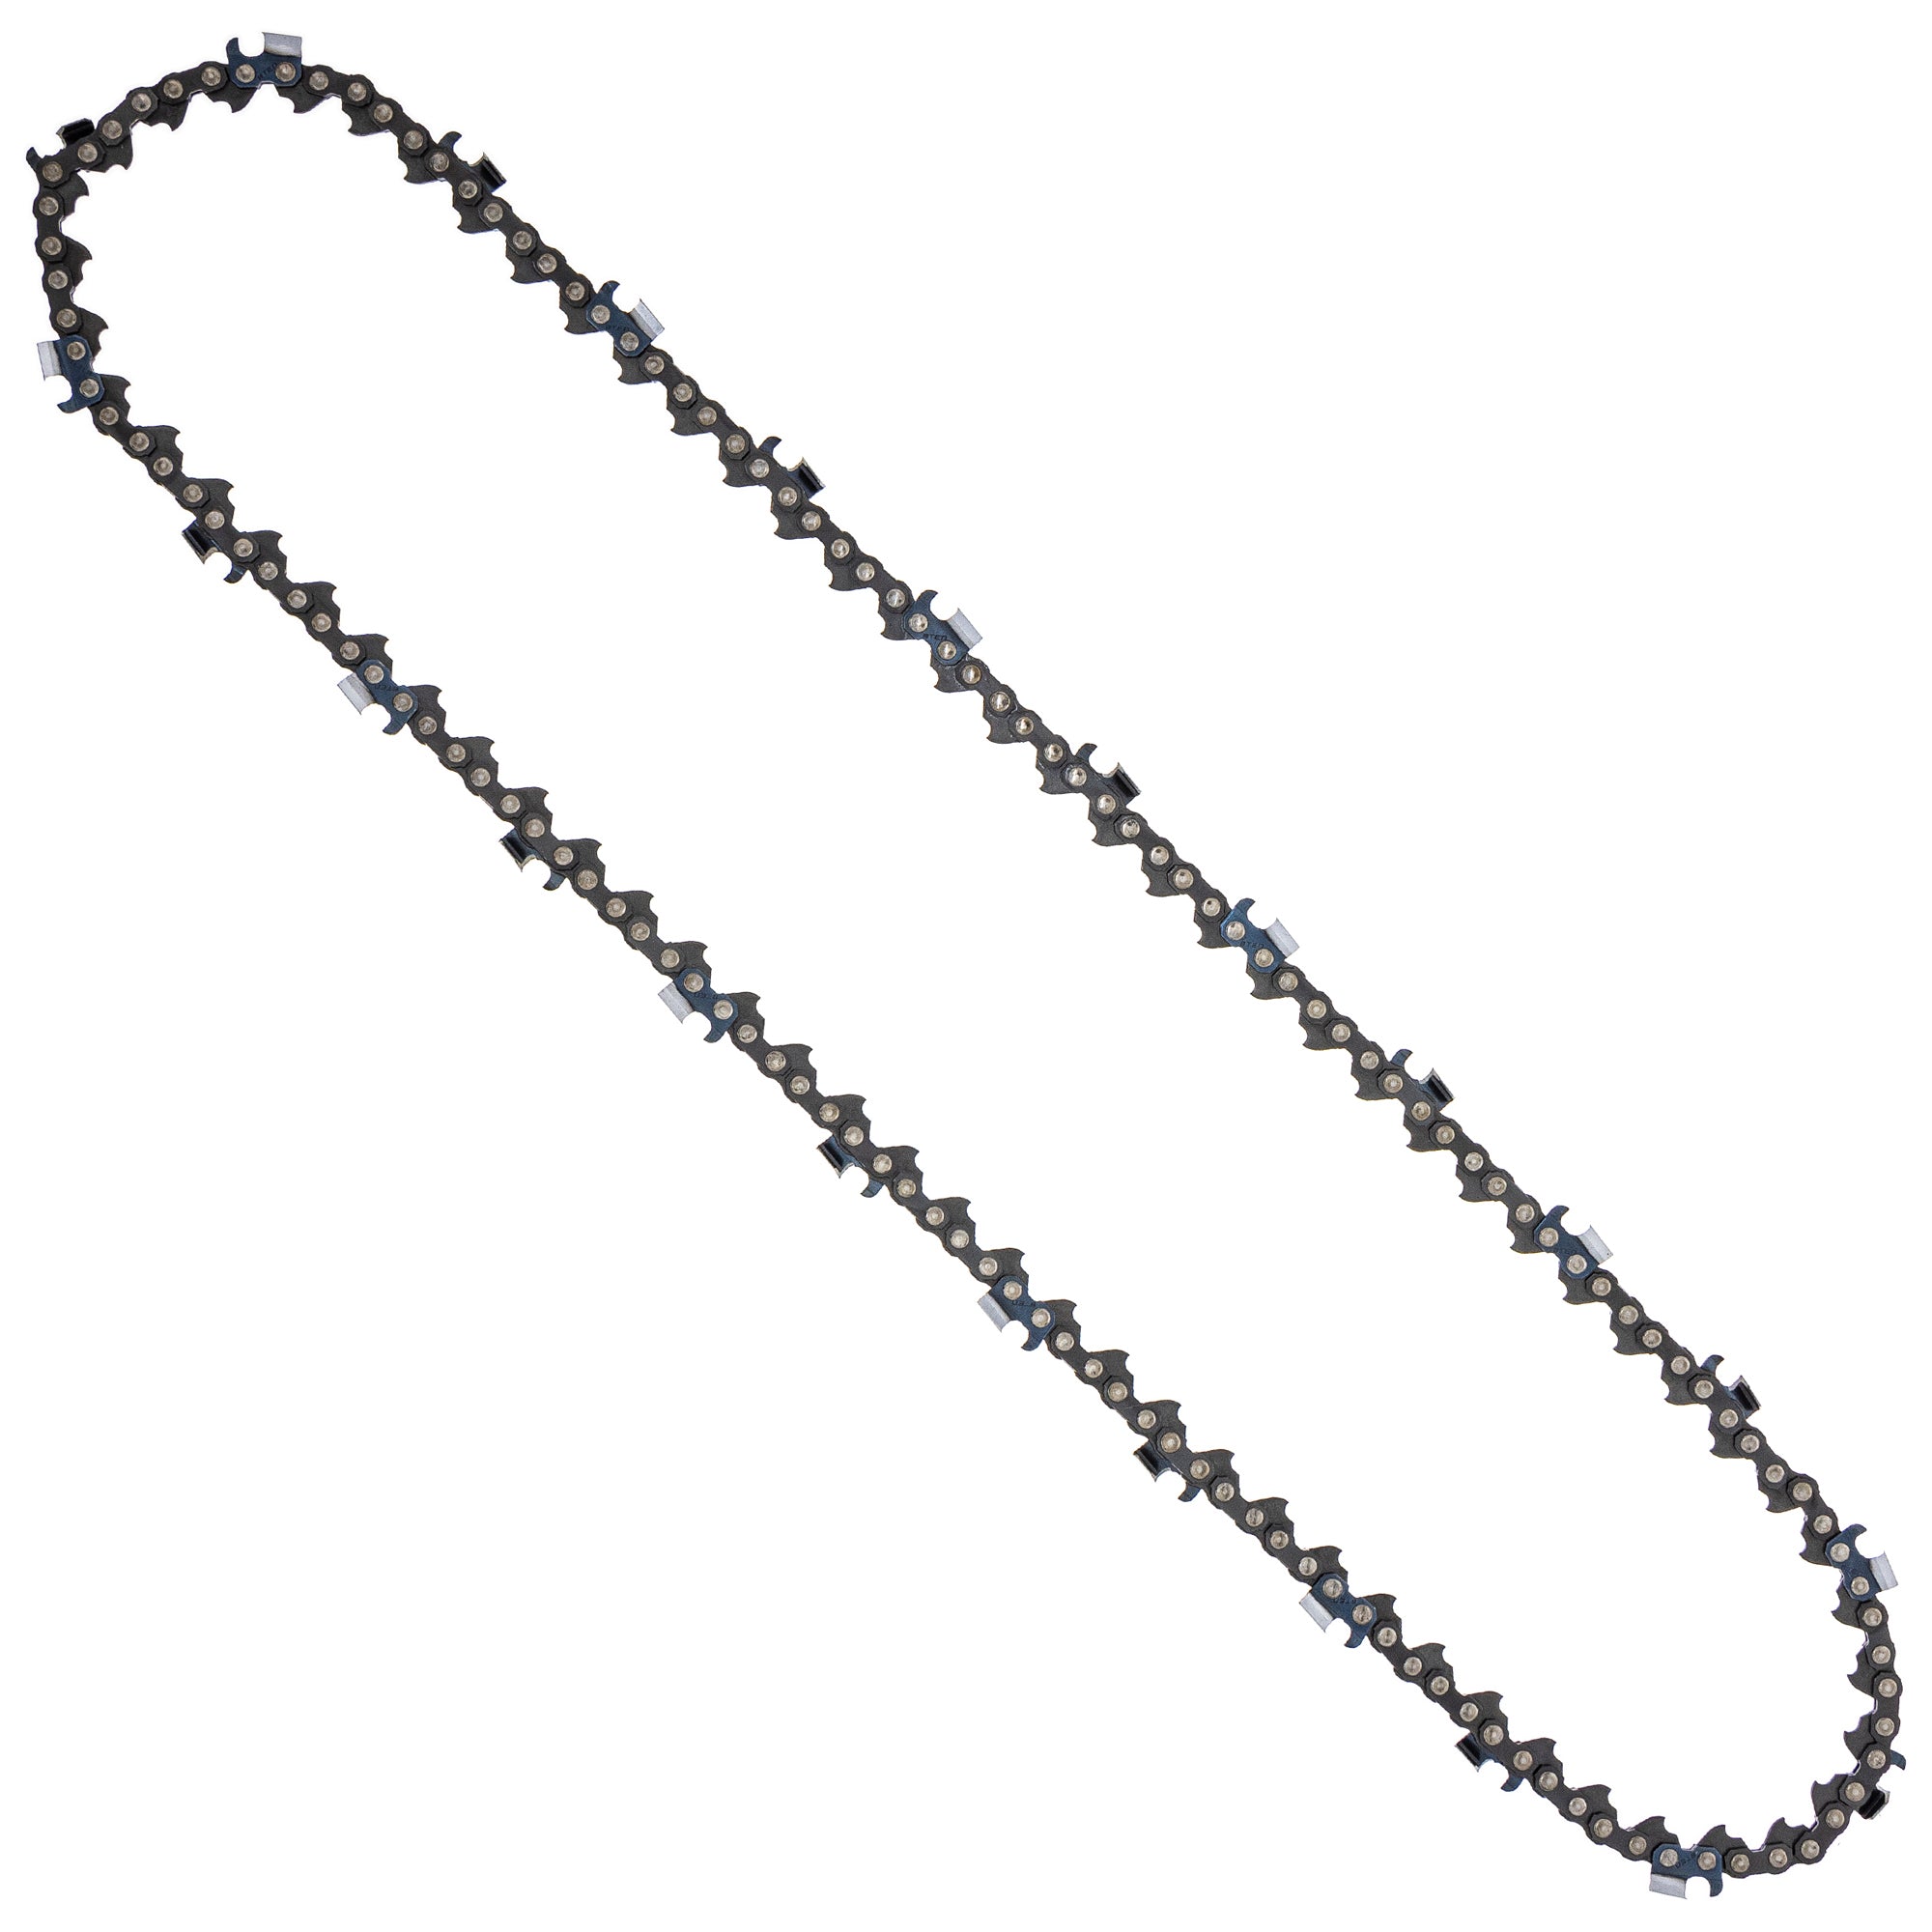 8TEN 810-CCC2290H Chain 4-Pack for zOTHER Oregon Husqvarna Poulan